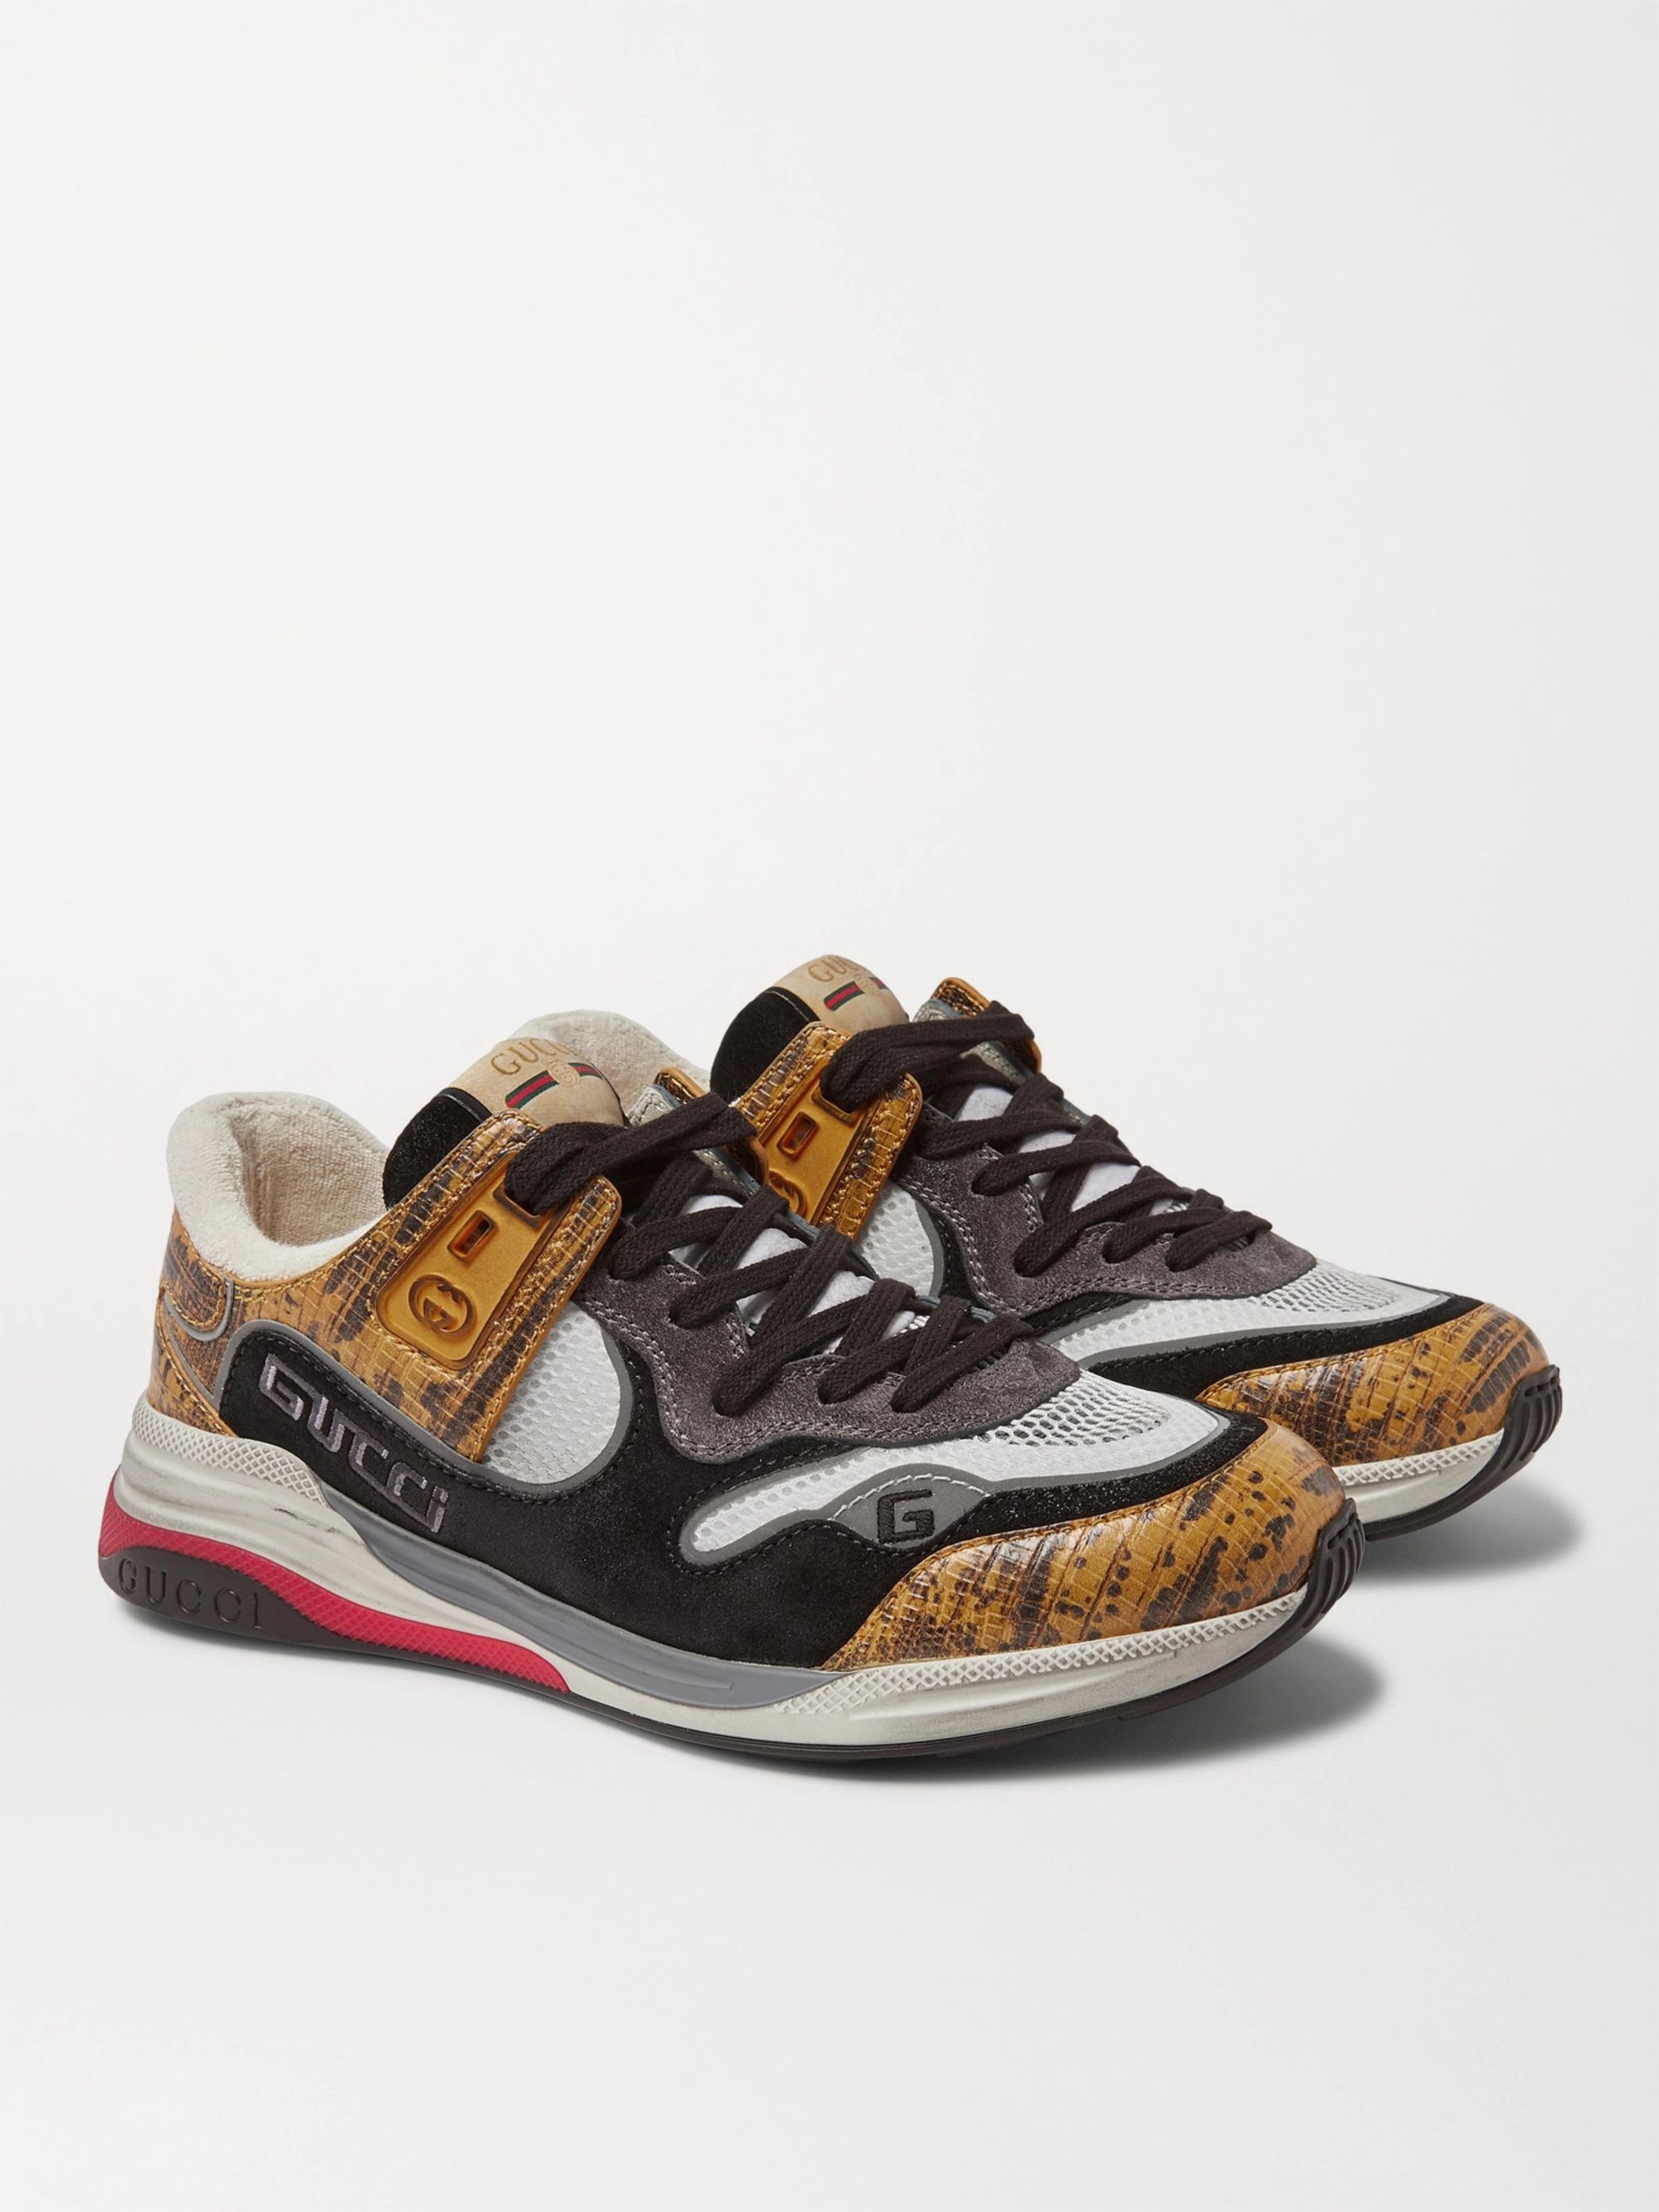 snake leather sneakers